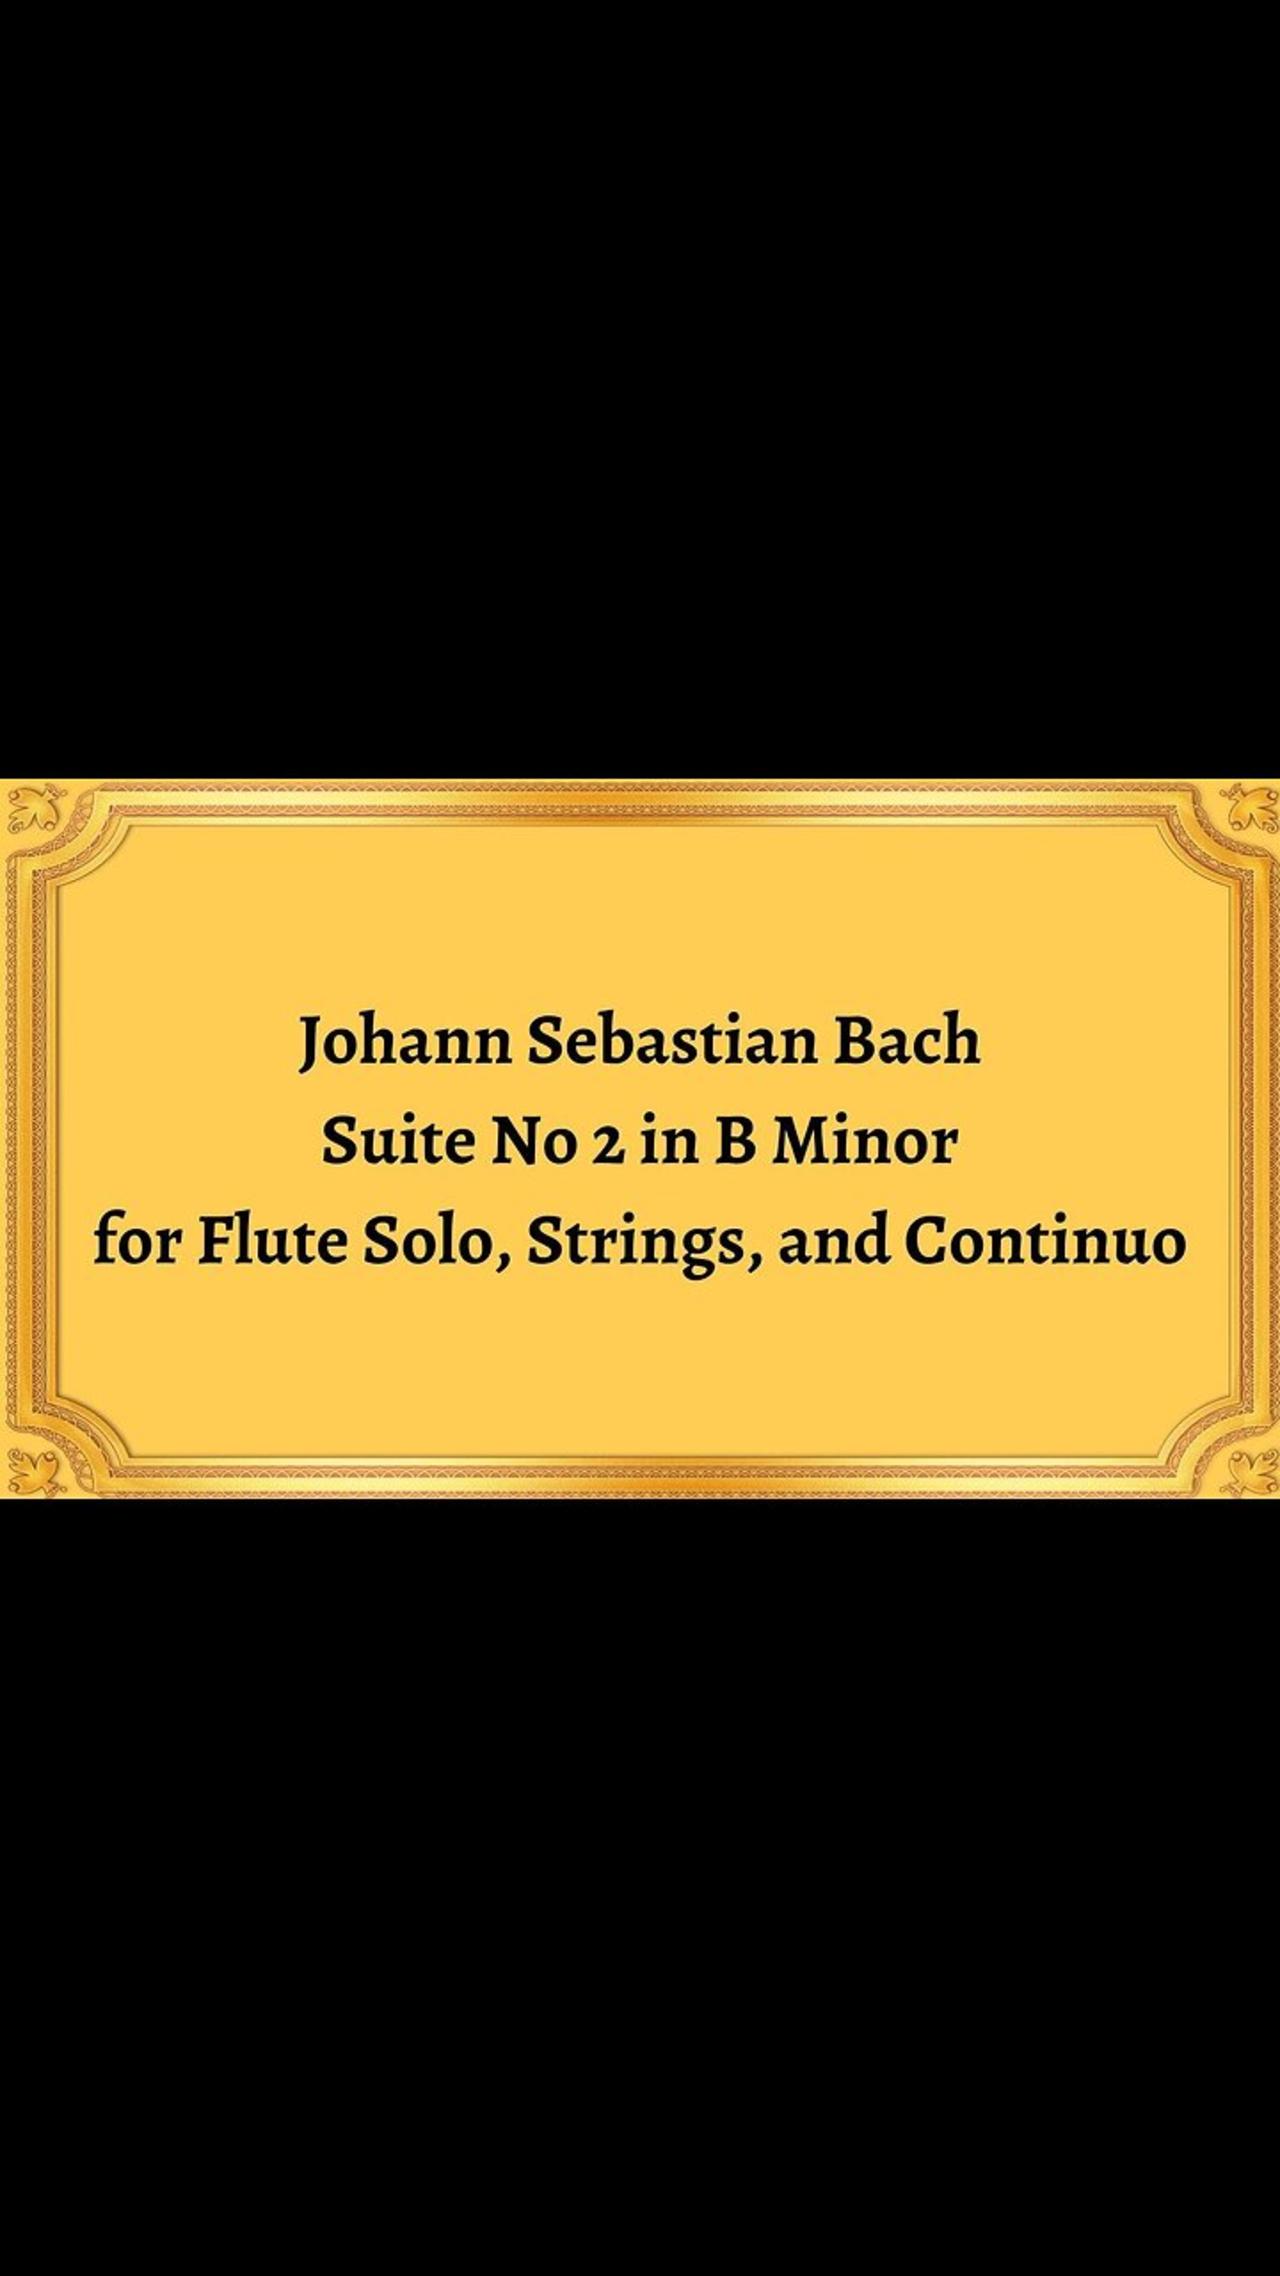 Johann Sebastian Bach Suite No 2 in B Minor for Flute Solo, Strings, and Continuo